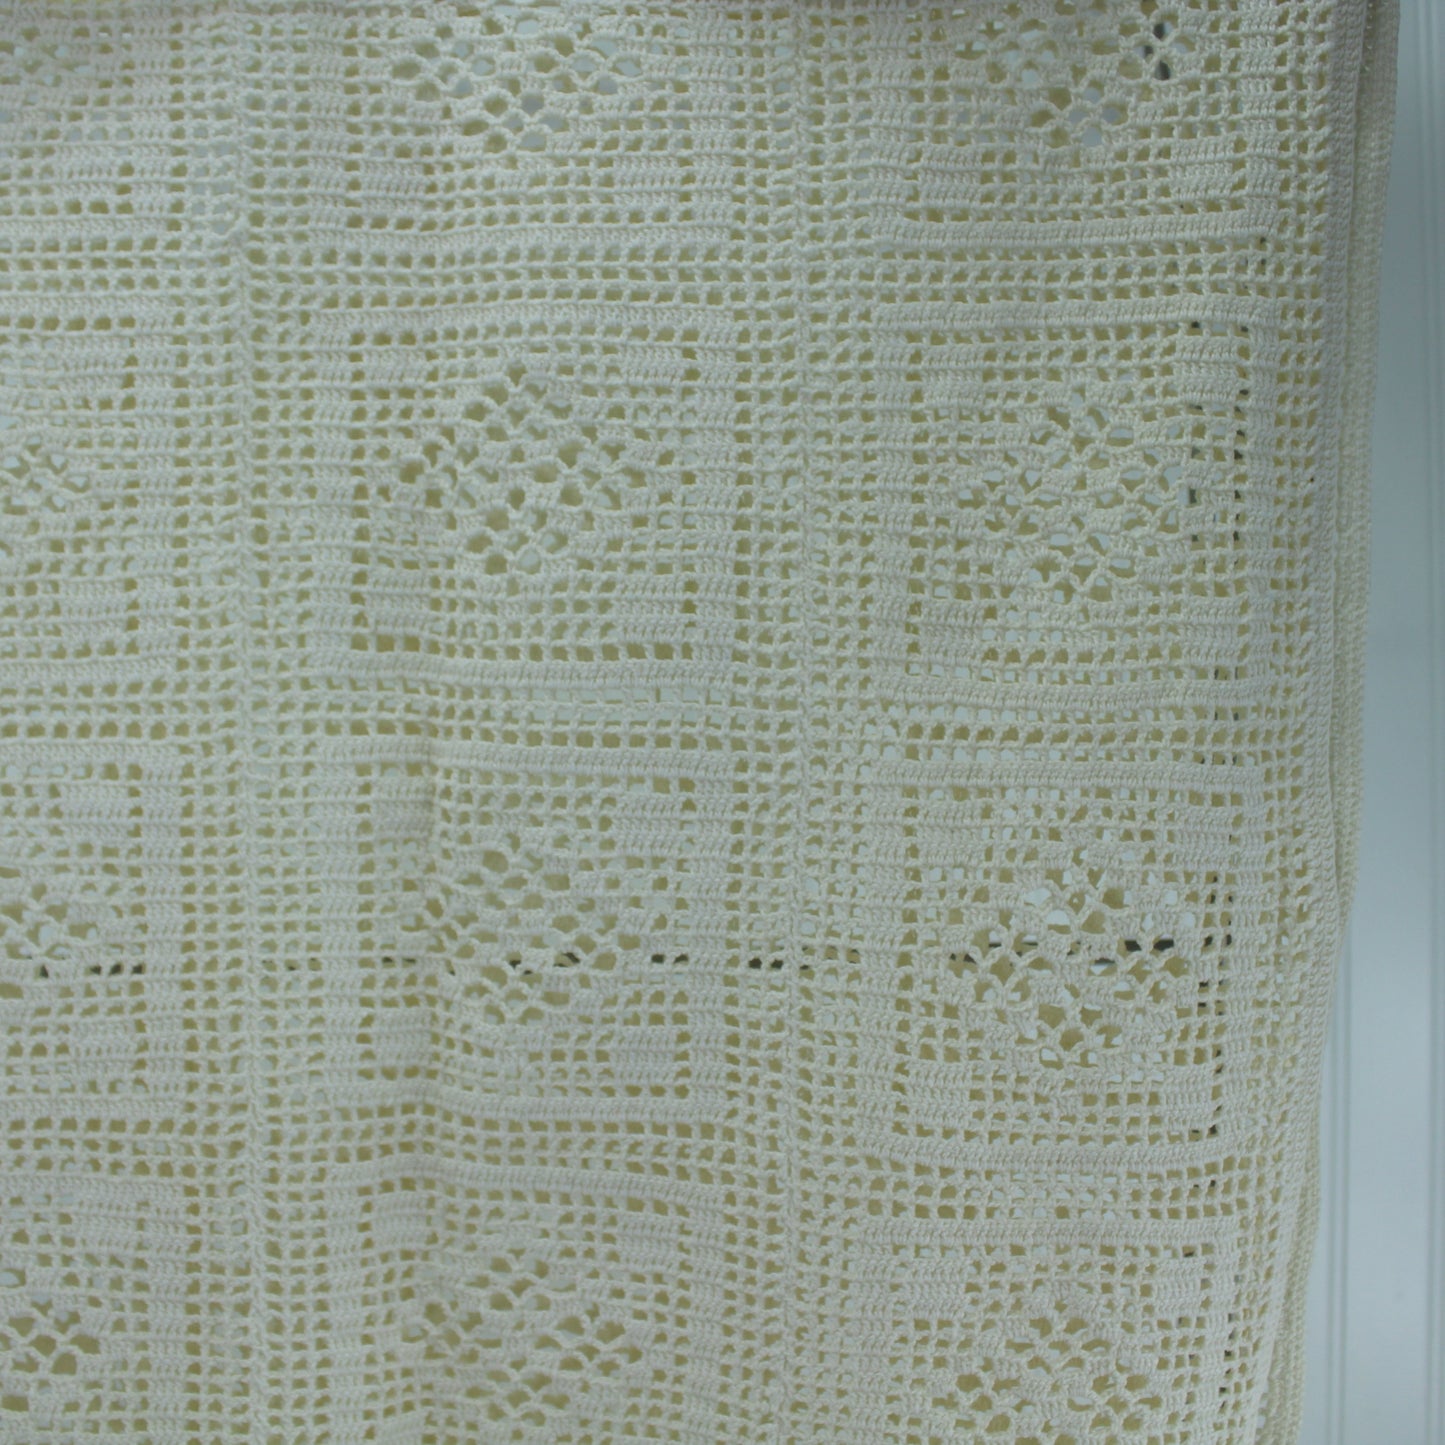 Crochet Window Curtain 2 Panels & Valance Heavy Cotton Hand Made closeup of excellent craft